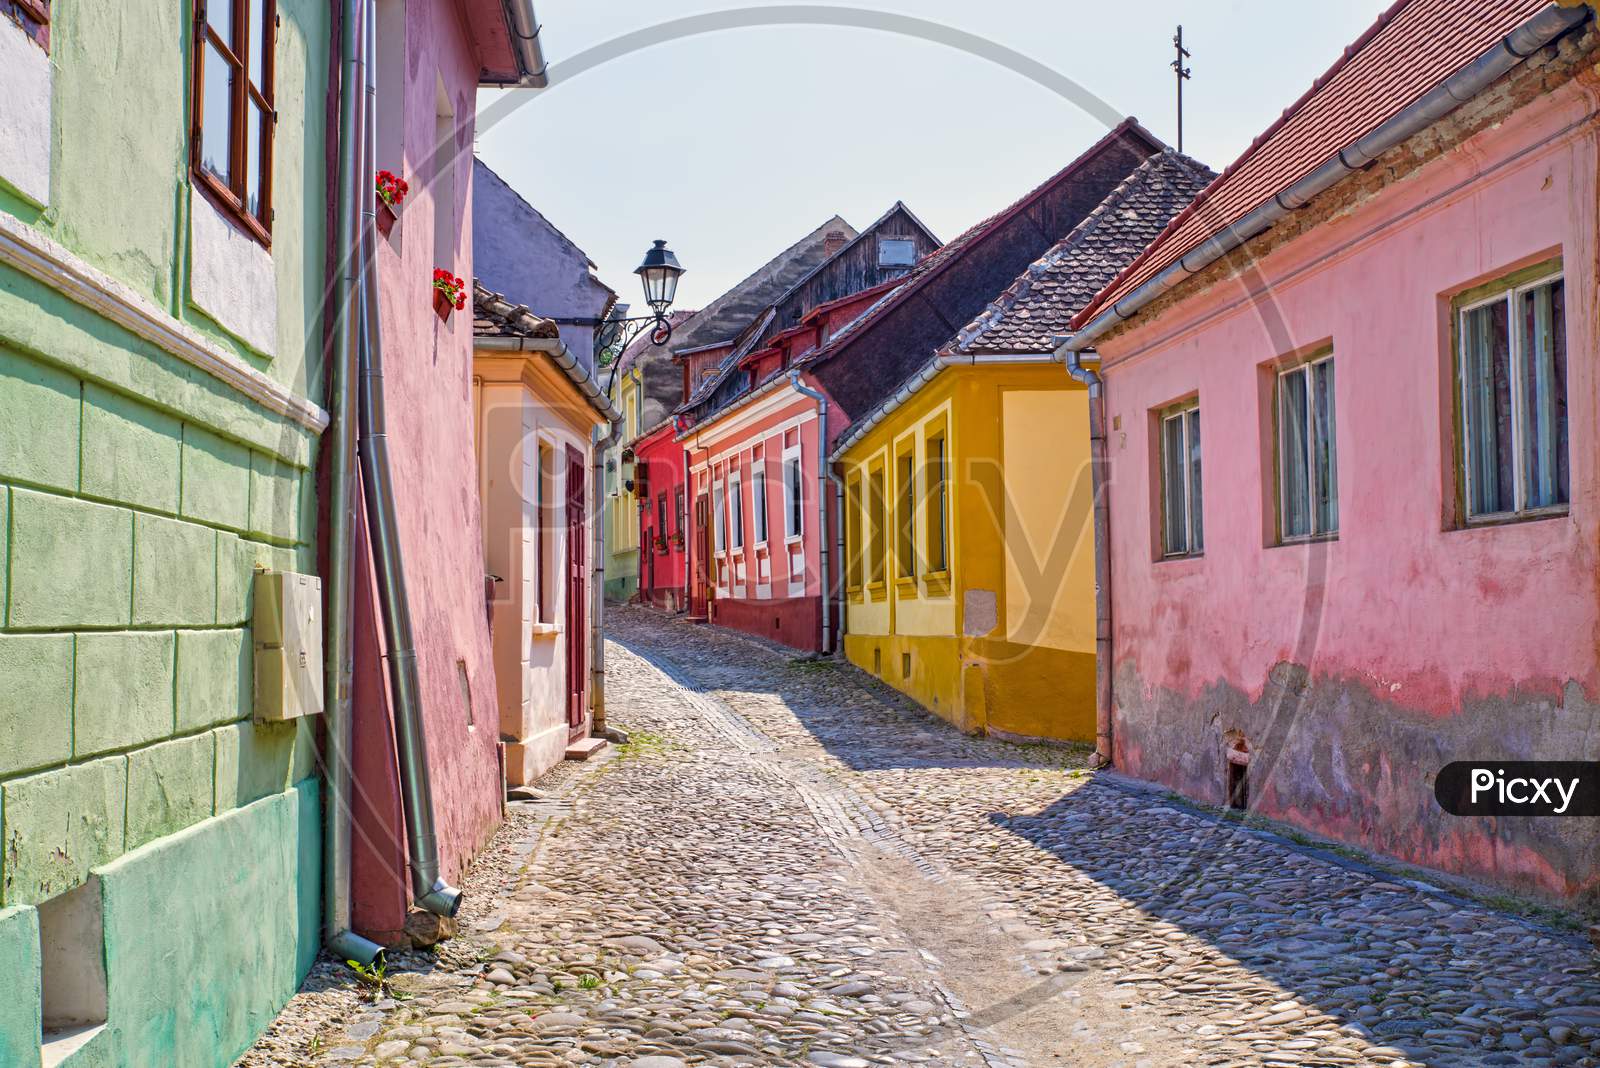 Stone Paved Road And Colorful Houses